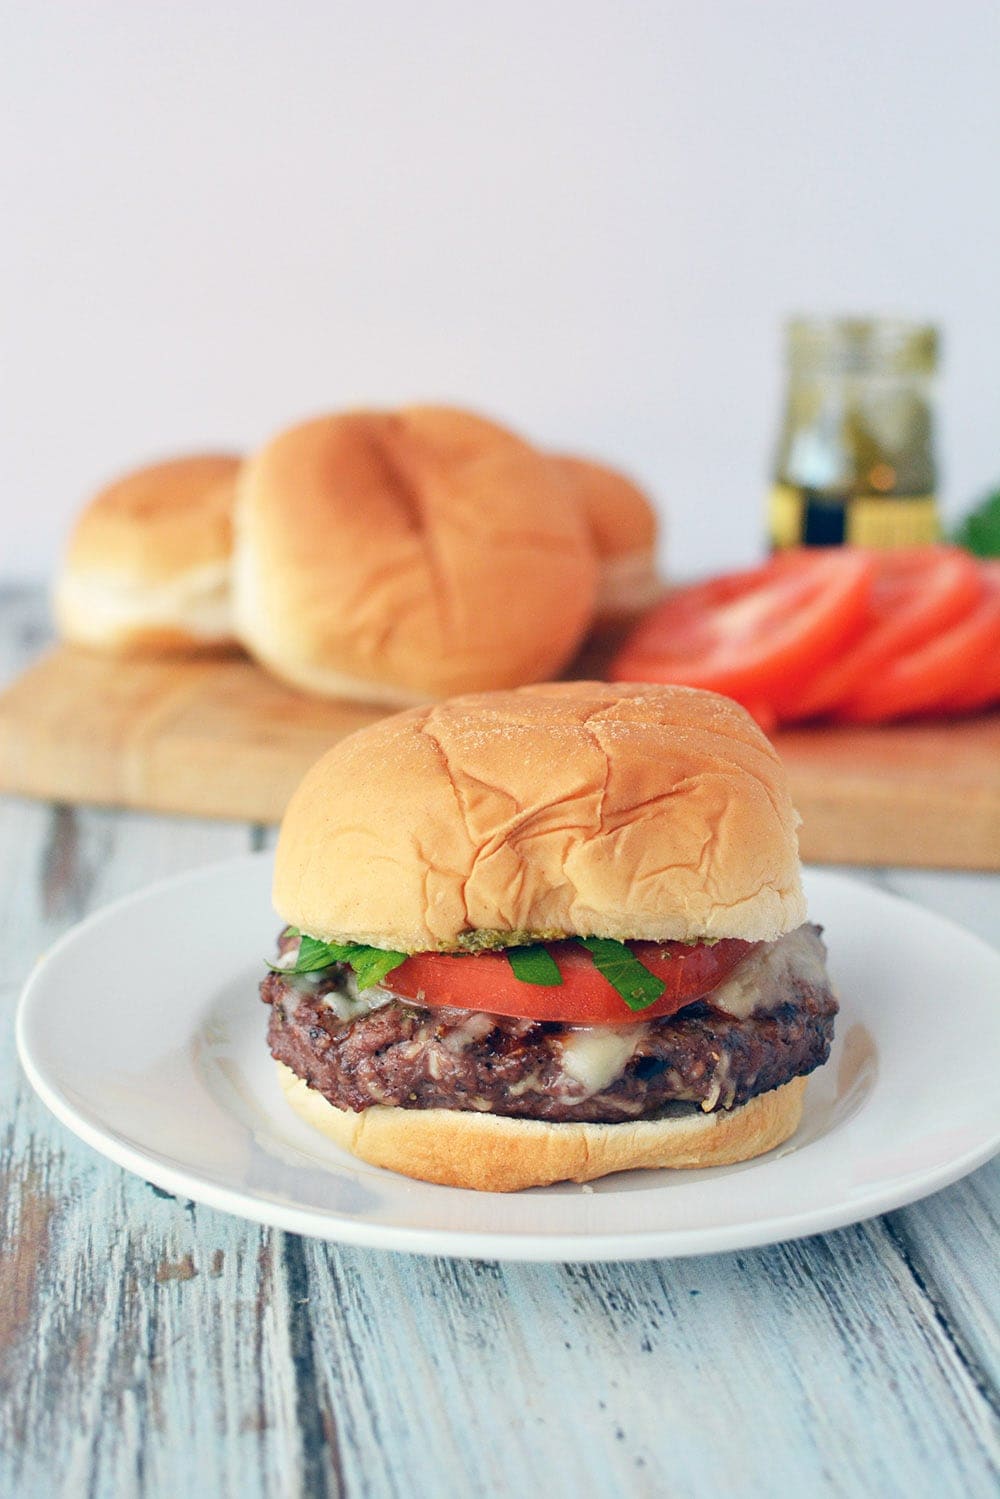 Grilled Italian Burger - Tasty Burger Recipes for Summer | A Magical Mess